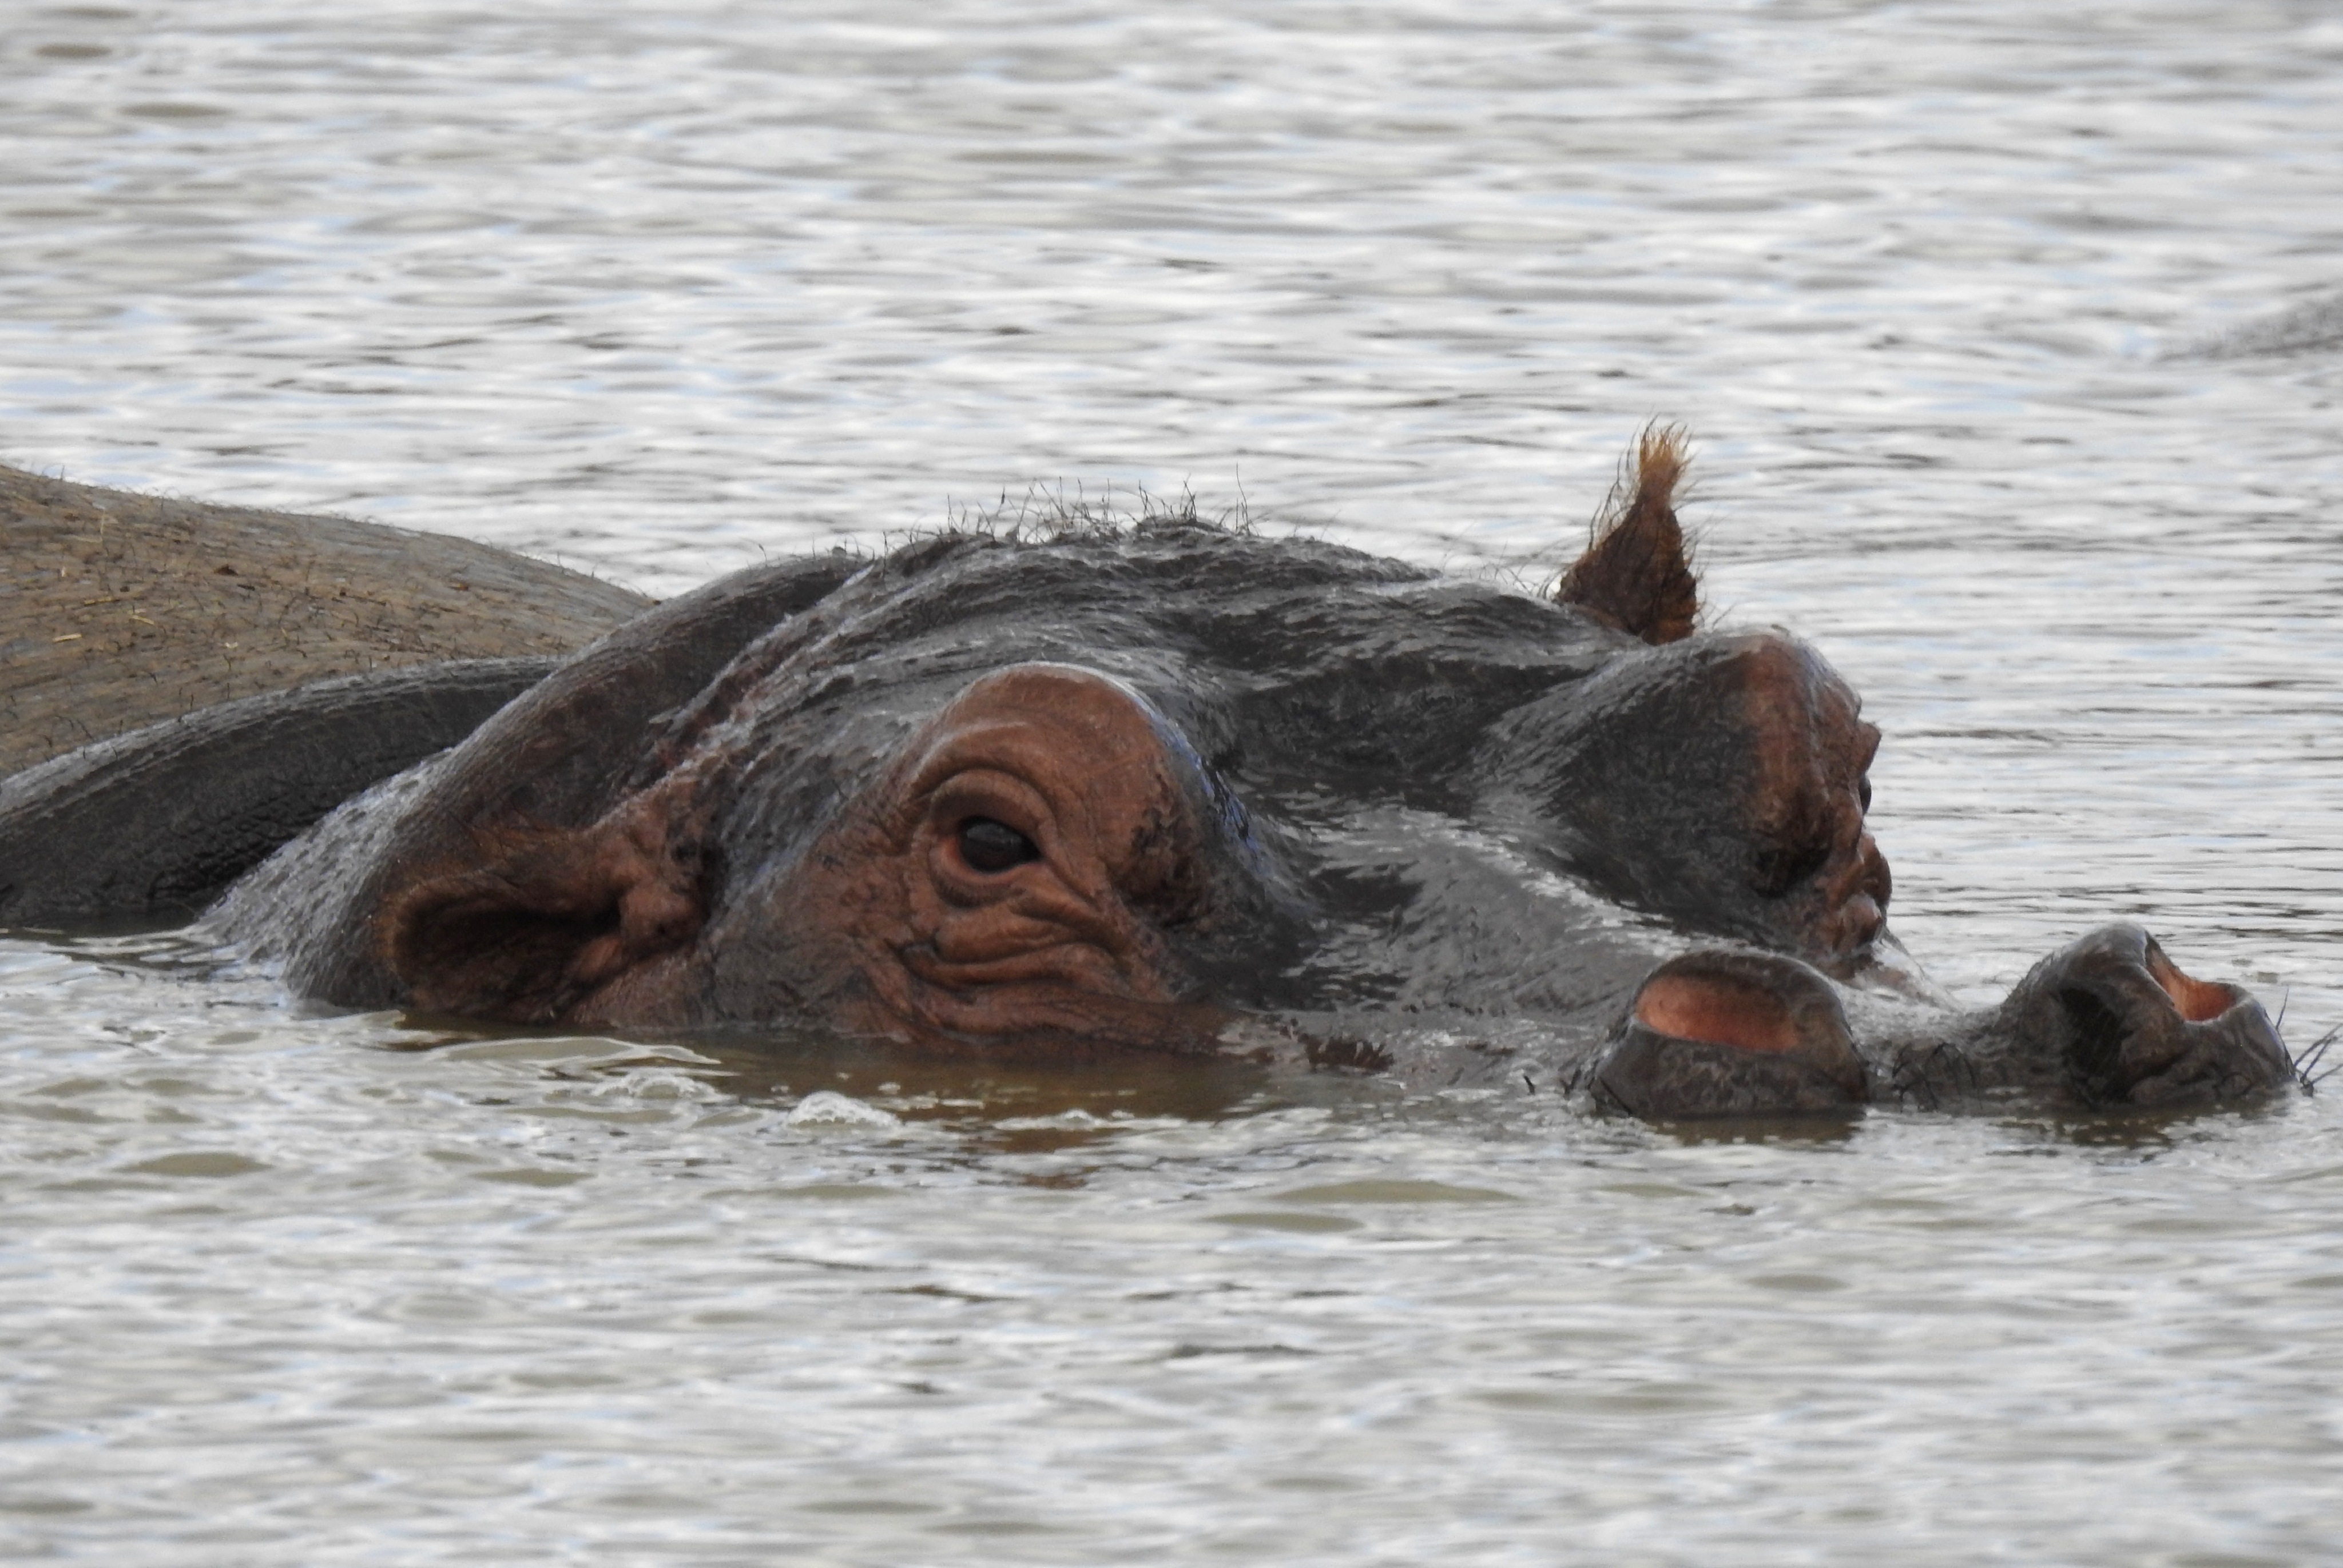 Hippo emerging from the water